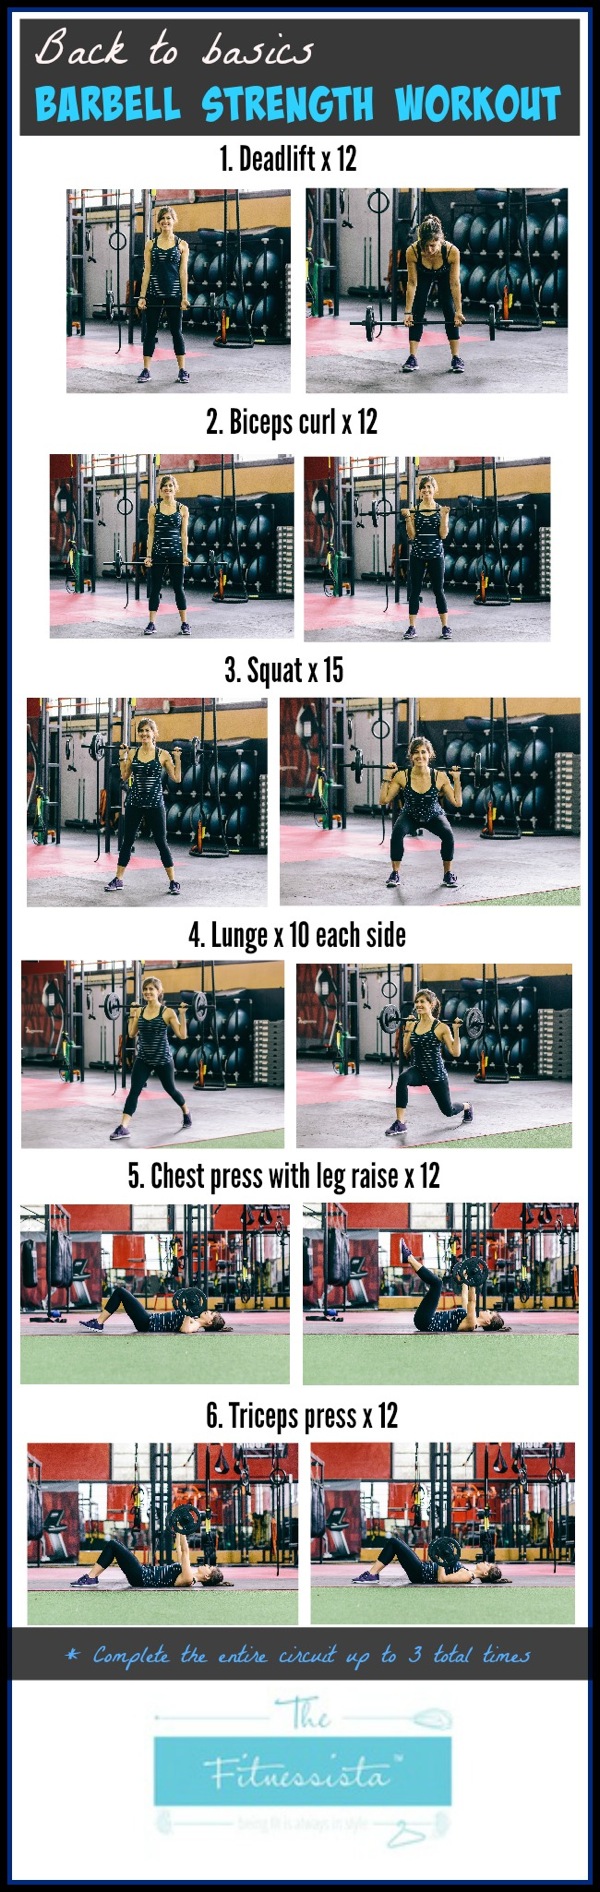 Back to basics barbell workout - The Fitnessista